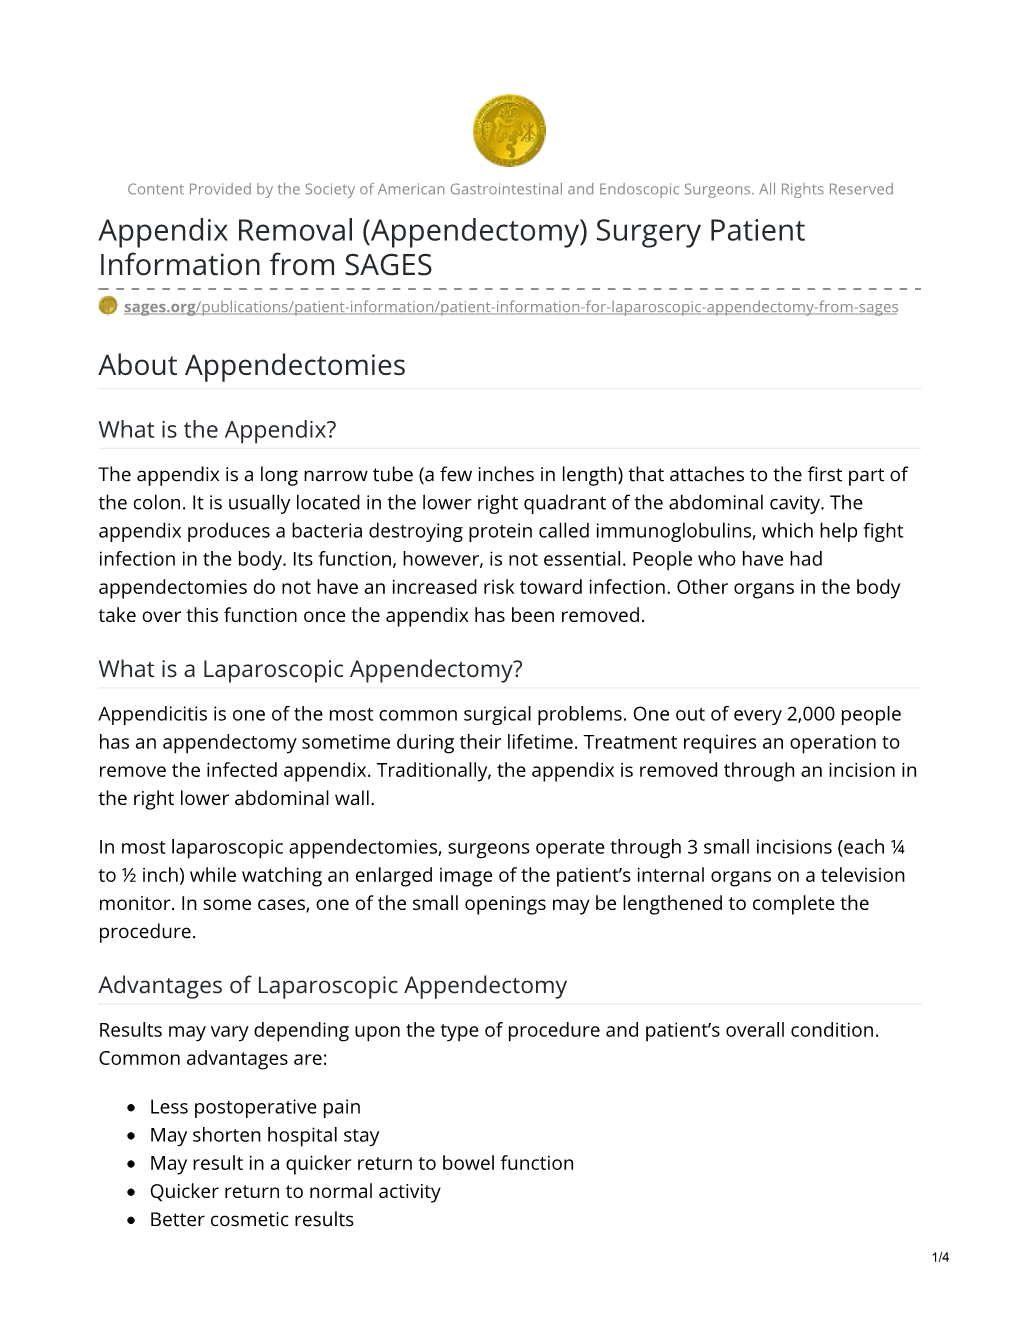 Appendix Removal (Appendectomy) Surgery Patient Information from SAGES